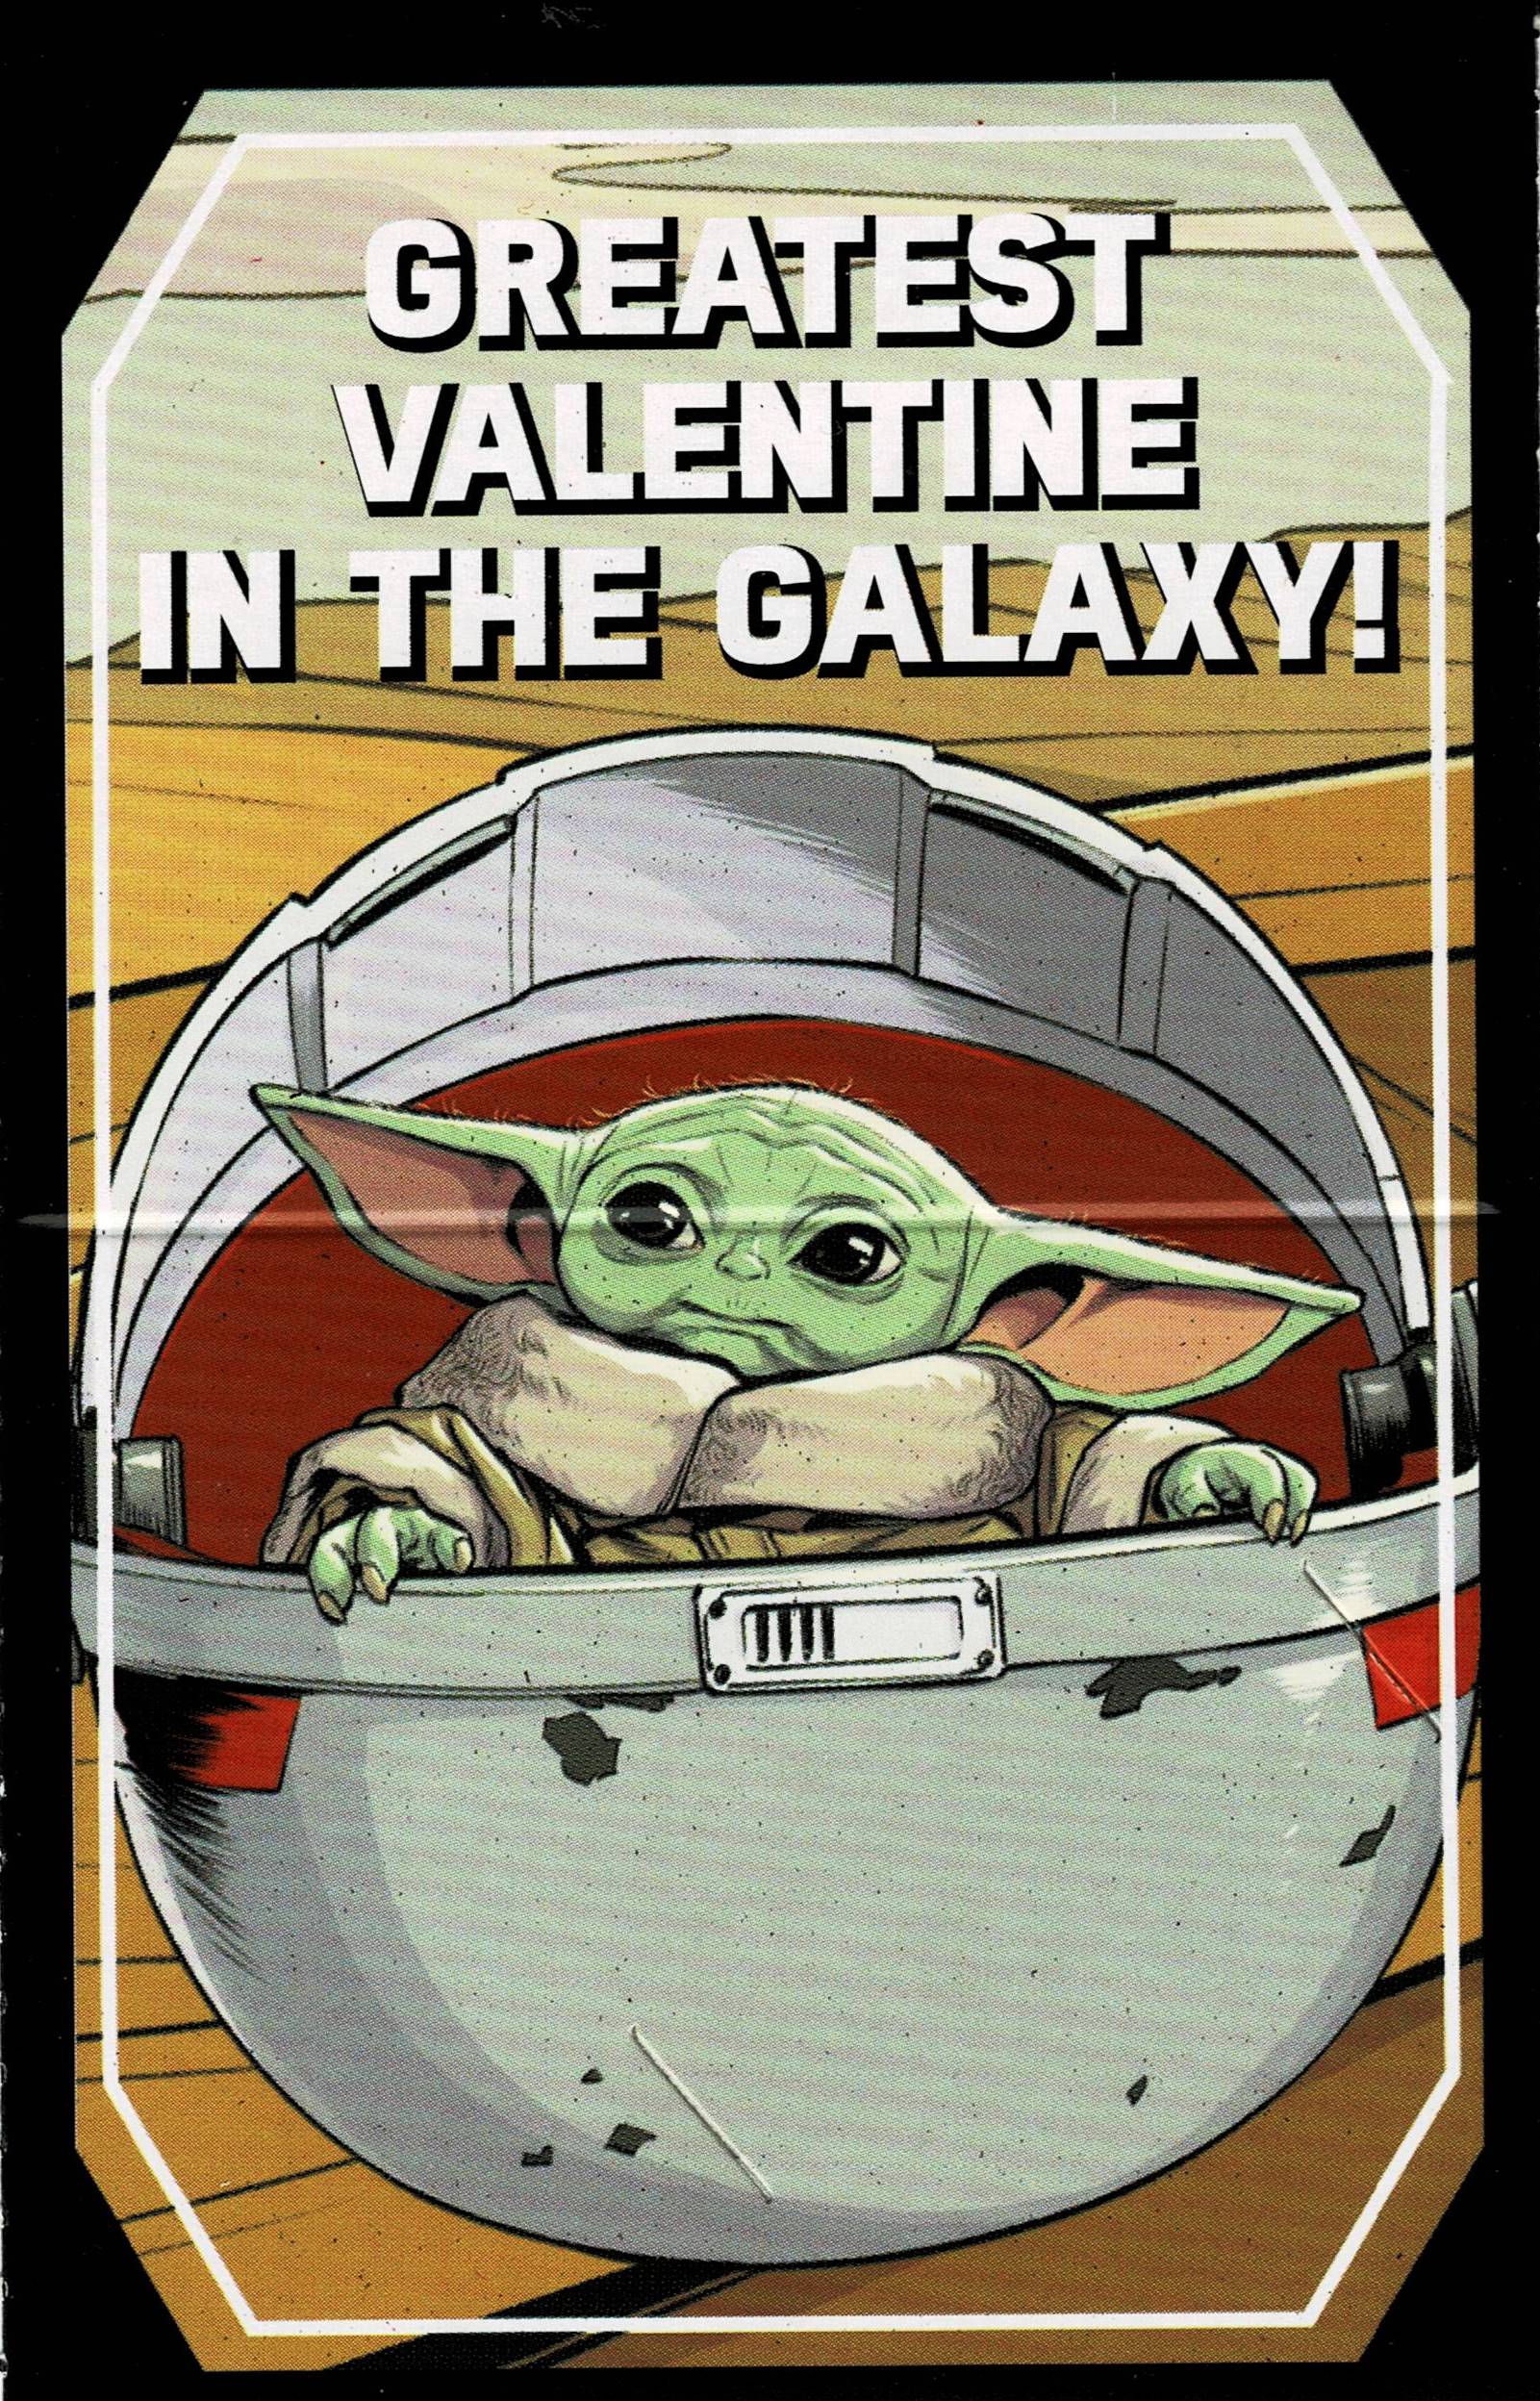 Greatest Valentine in the Galaxy!